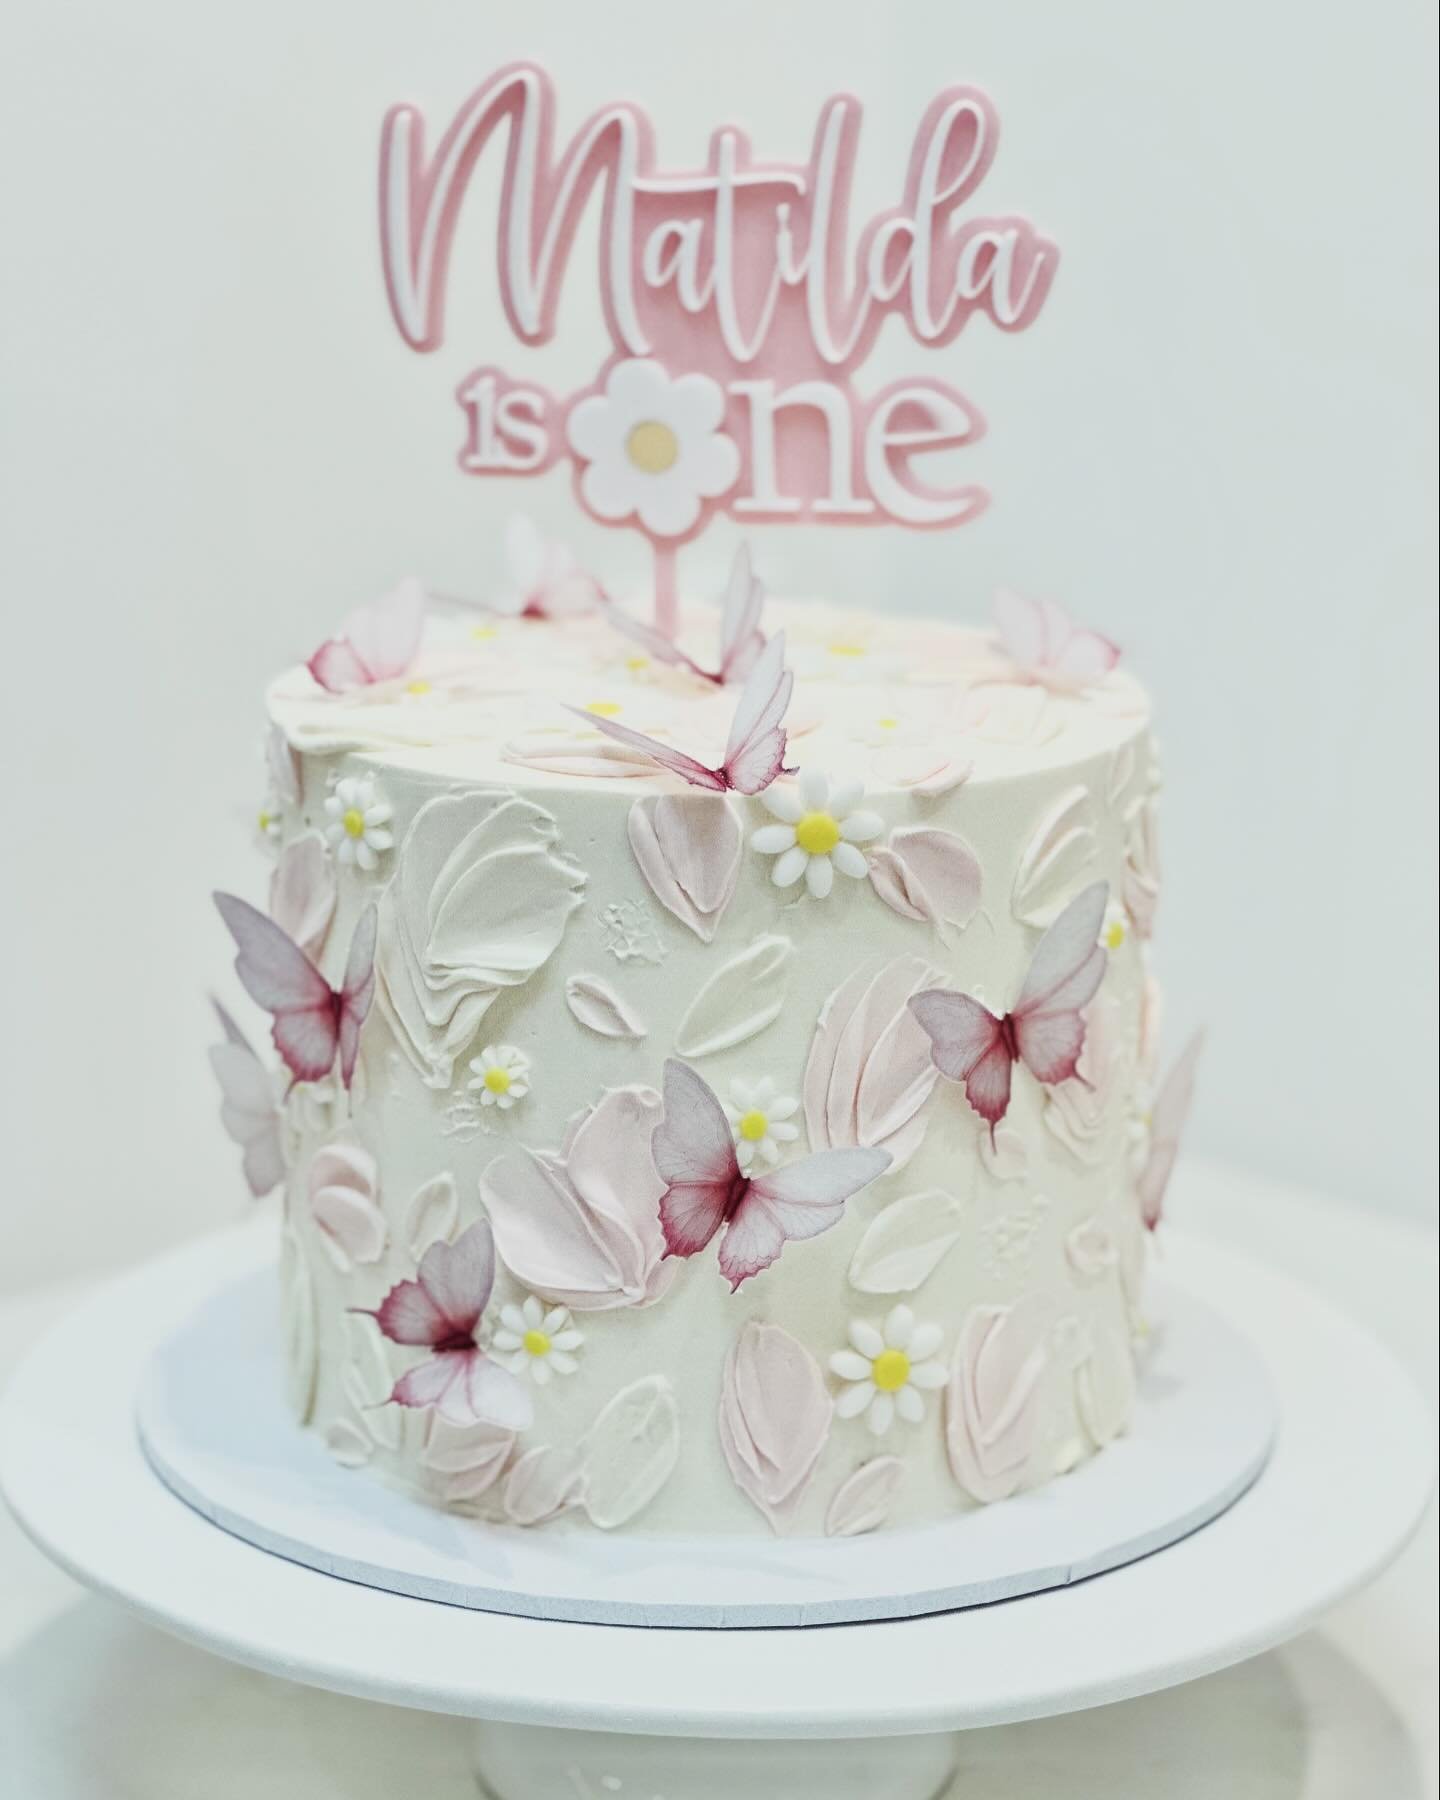 A magical 1st Birthday cake for sweet Matilda adorn with delicate daisies and fluttering butterflies. Thank you to @sweettoothmelbourne  for the prettiest cake topper and wafer paper butterflies from @moreish.cakes. #firstbirthdaycake #daisycake #but